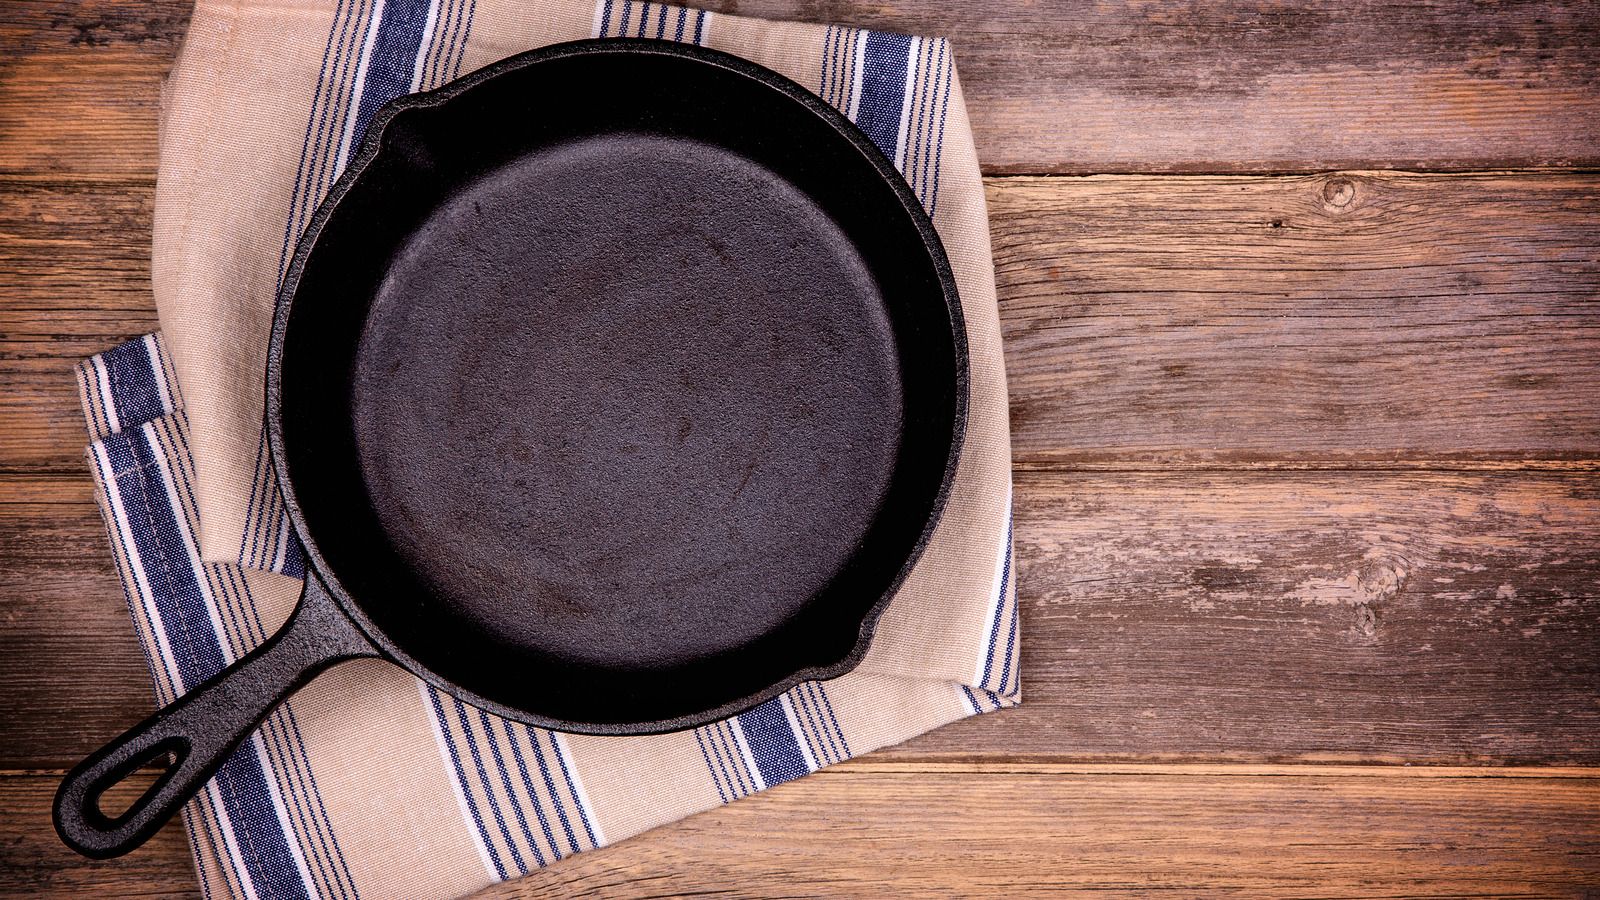 7 Cast Iron Brands To Buy And 5 To Avoid